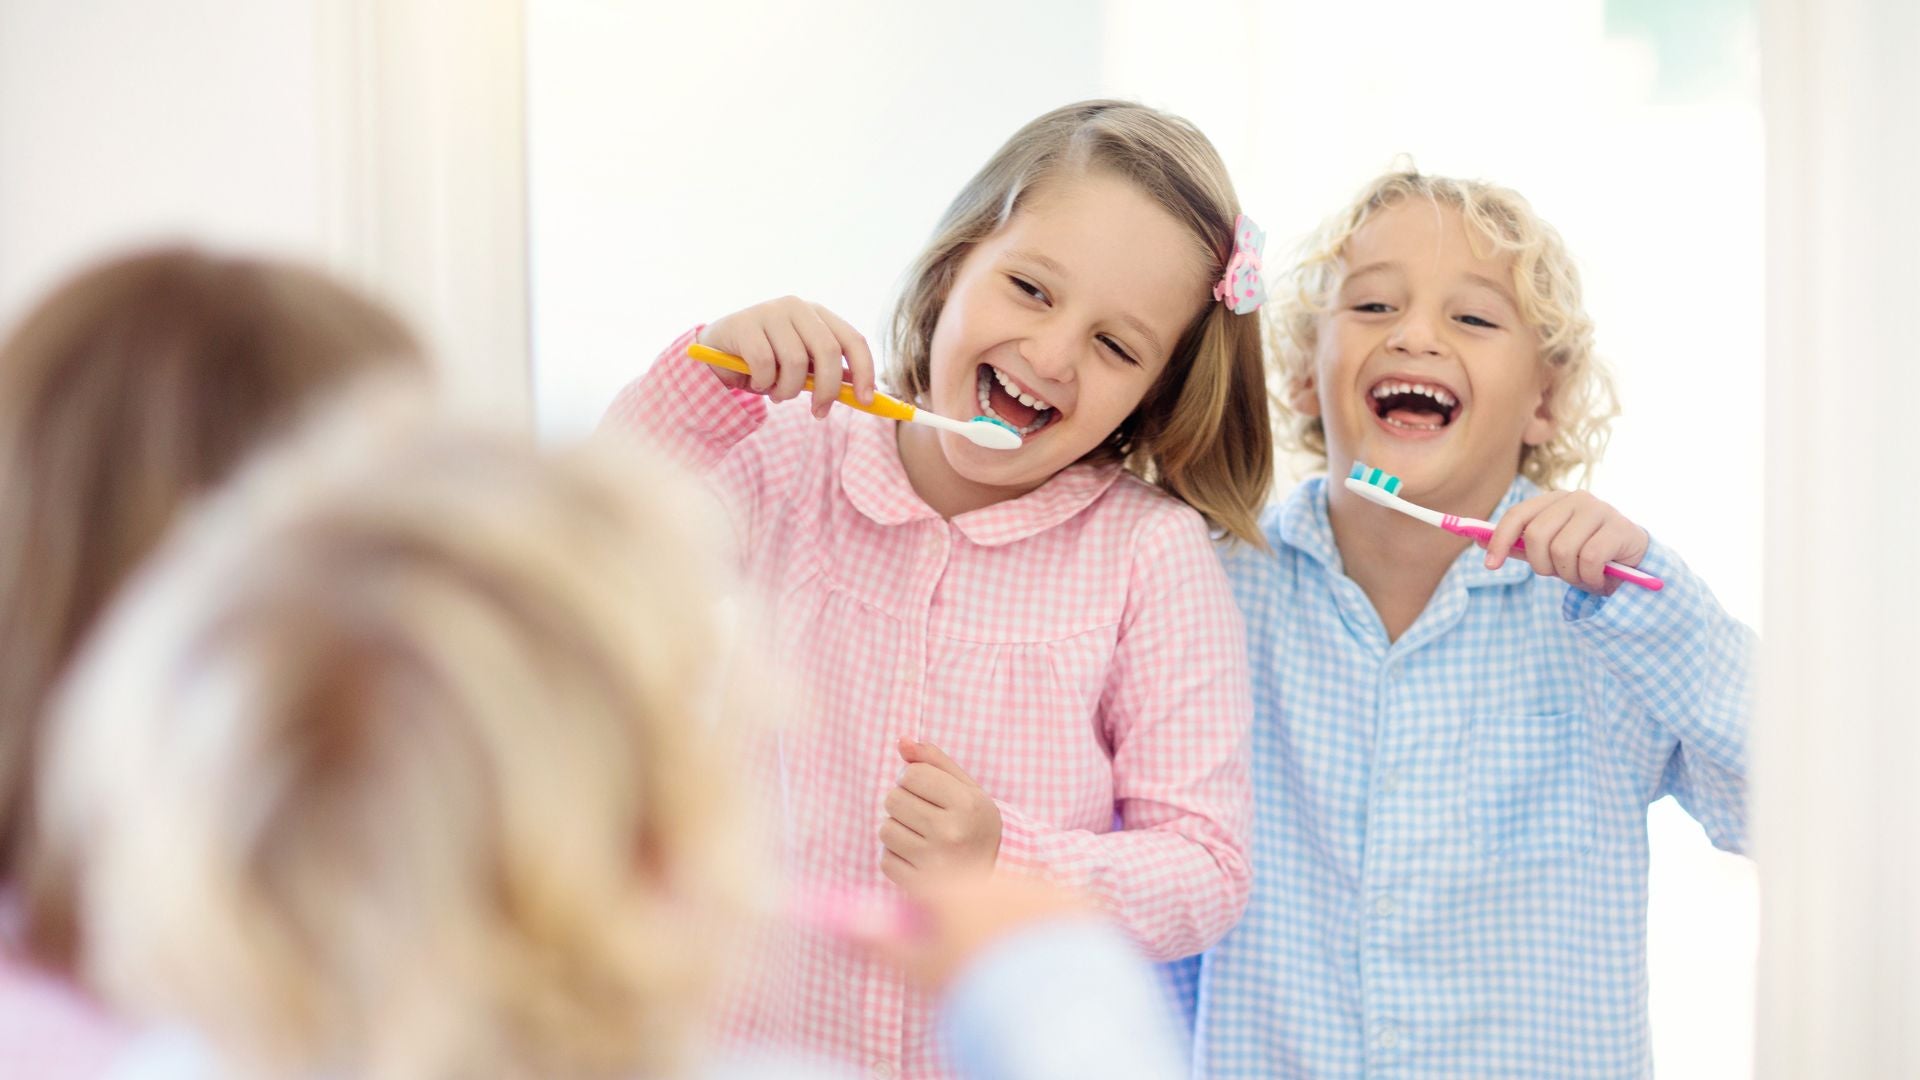 Oral Hygiene: Tips To Keep Your Child's Teeth Clean and Strong